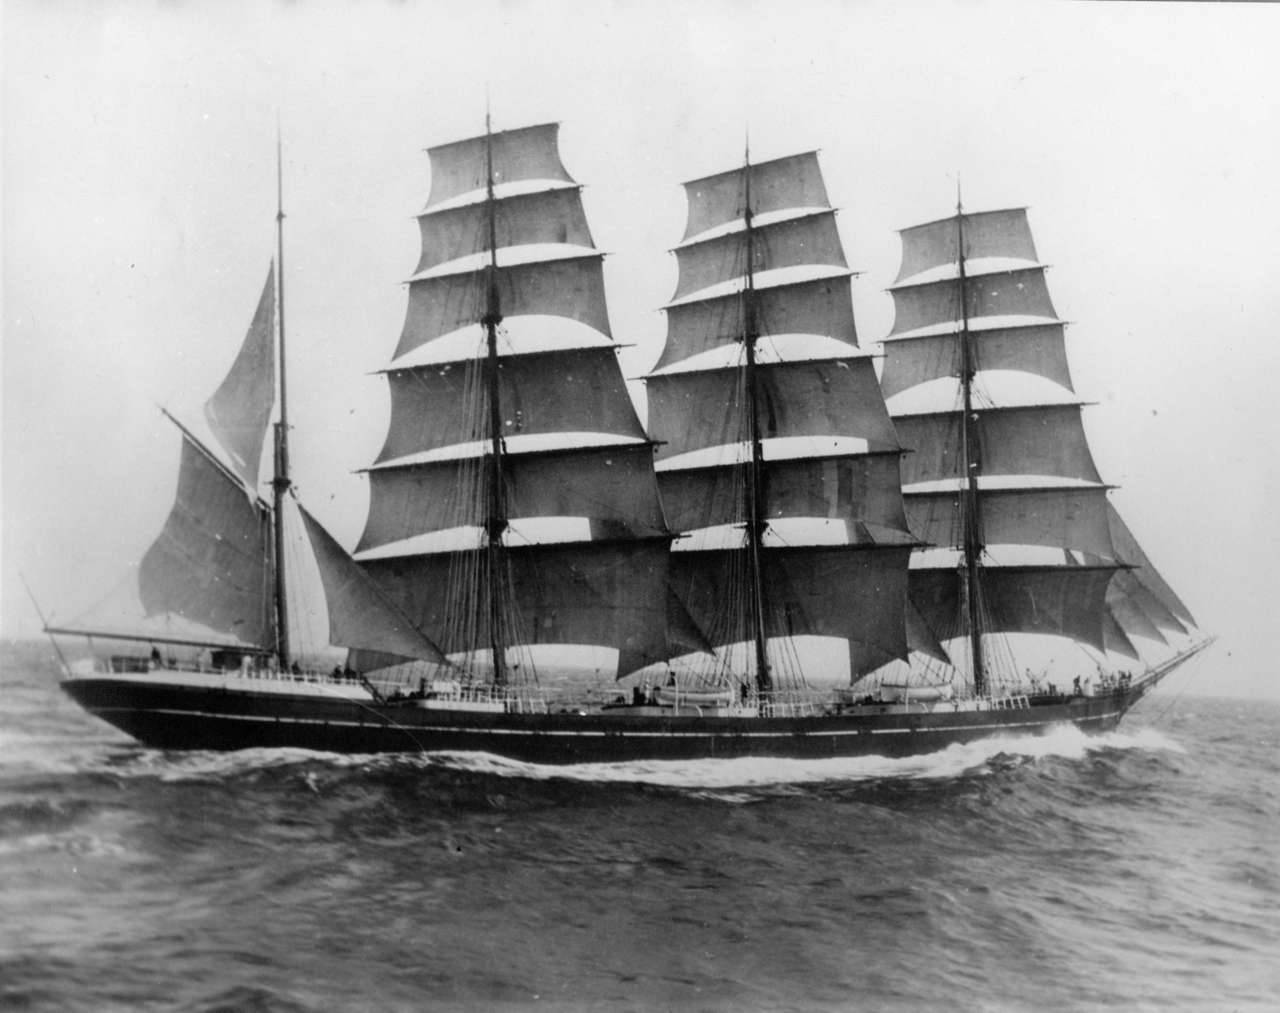 lazyjacks:
“Ponapi nearing Queenstown with full cargo of Australian wheat
James Crookall
City of Vancouver Archives
Reference code AM640-S1-: CVA 260-1193
”